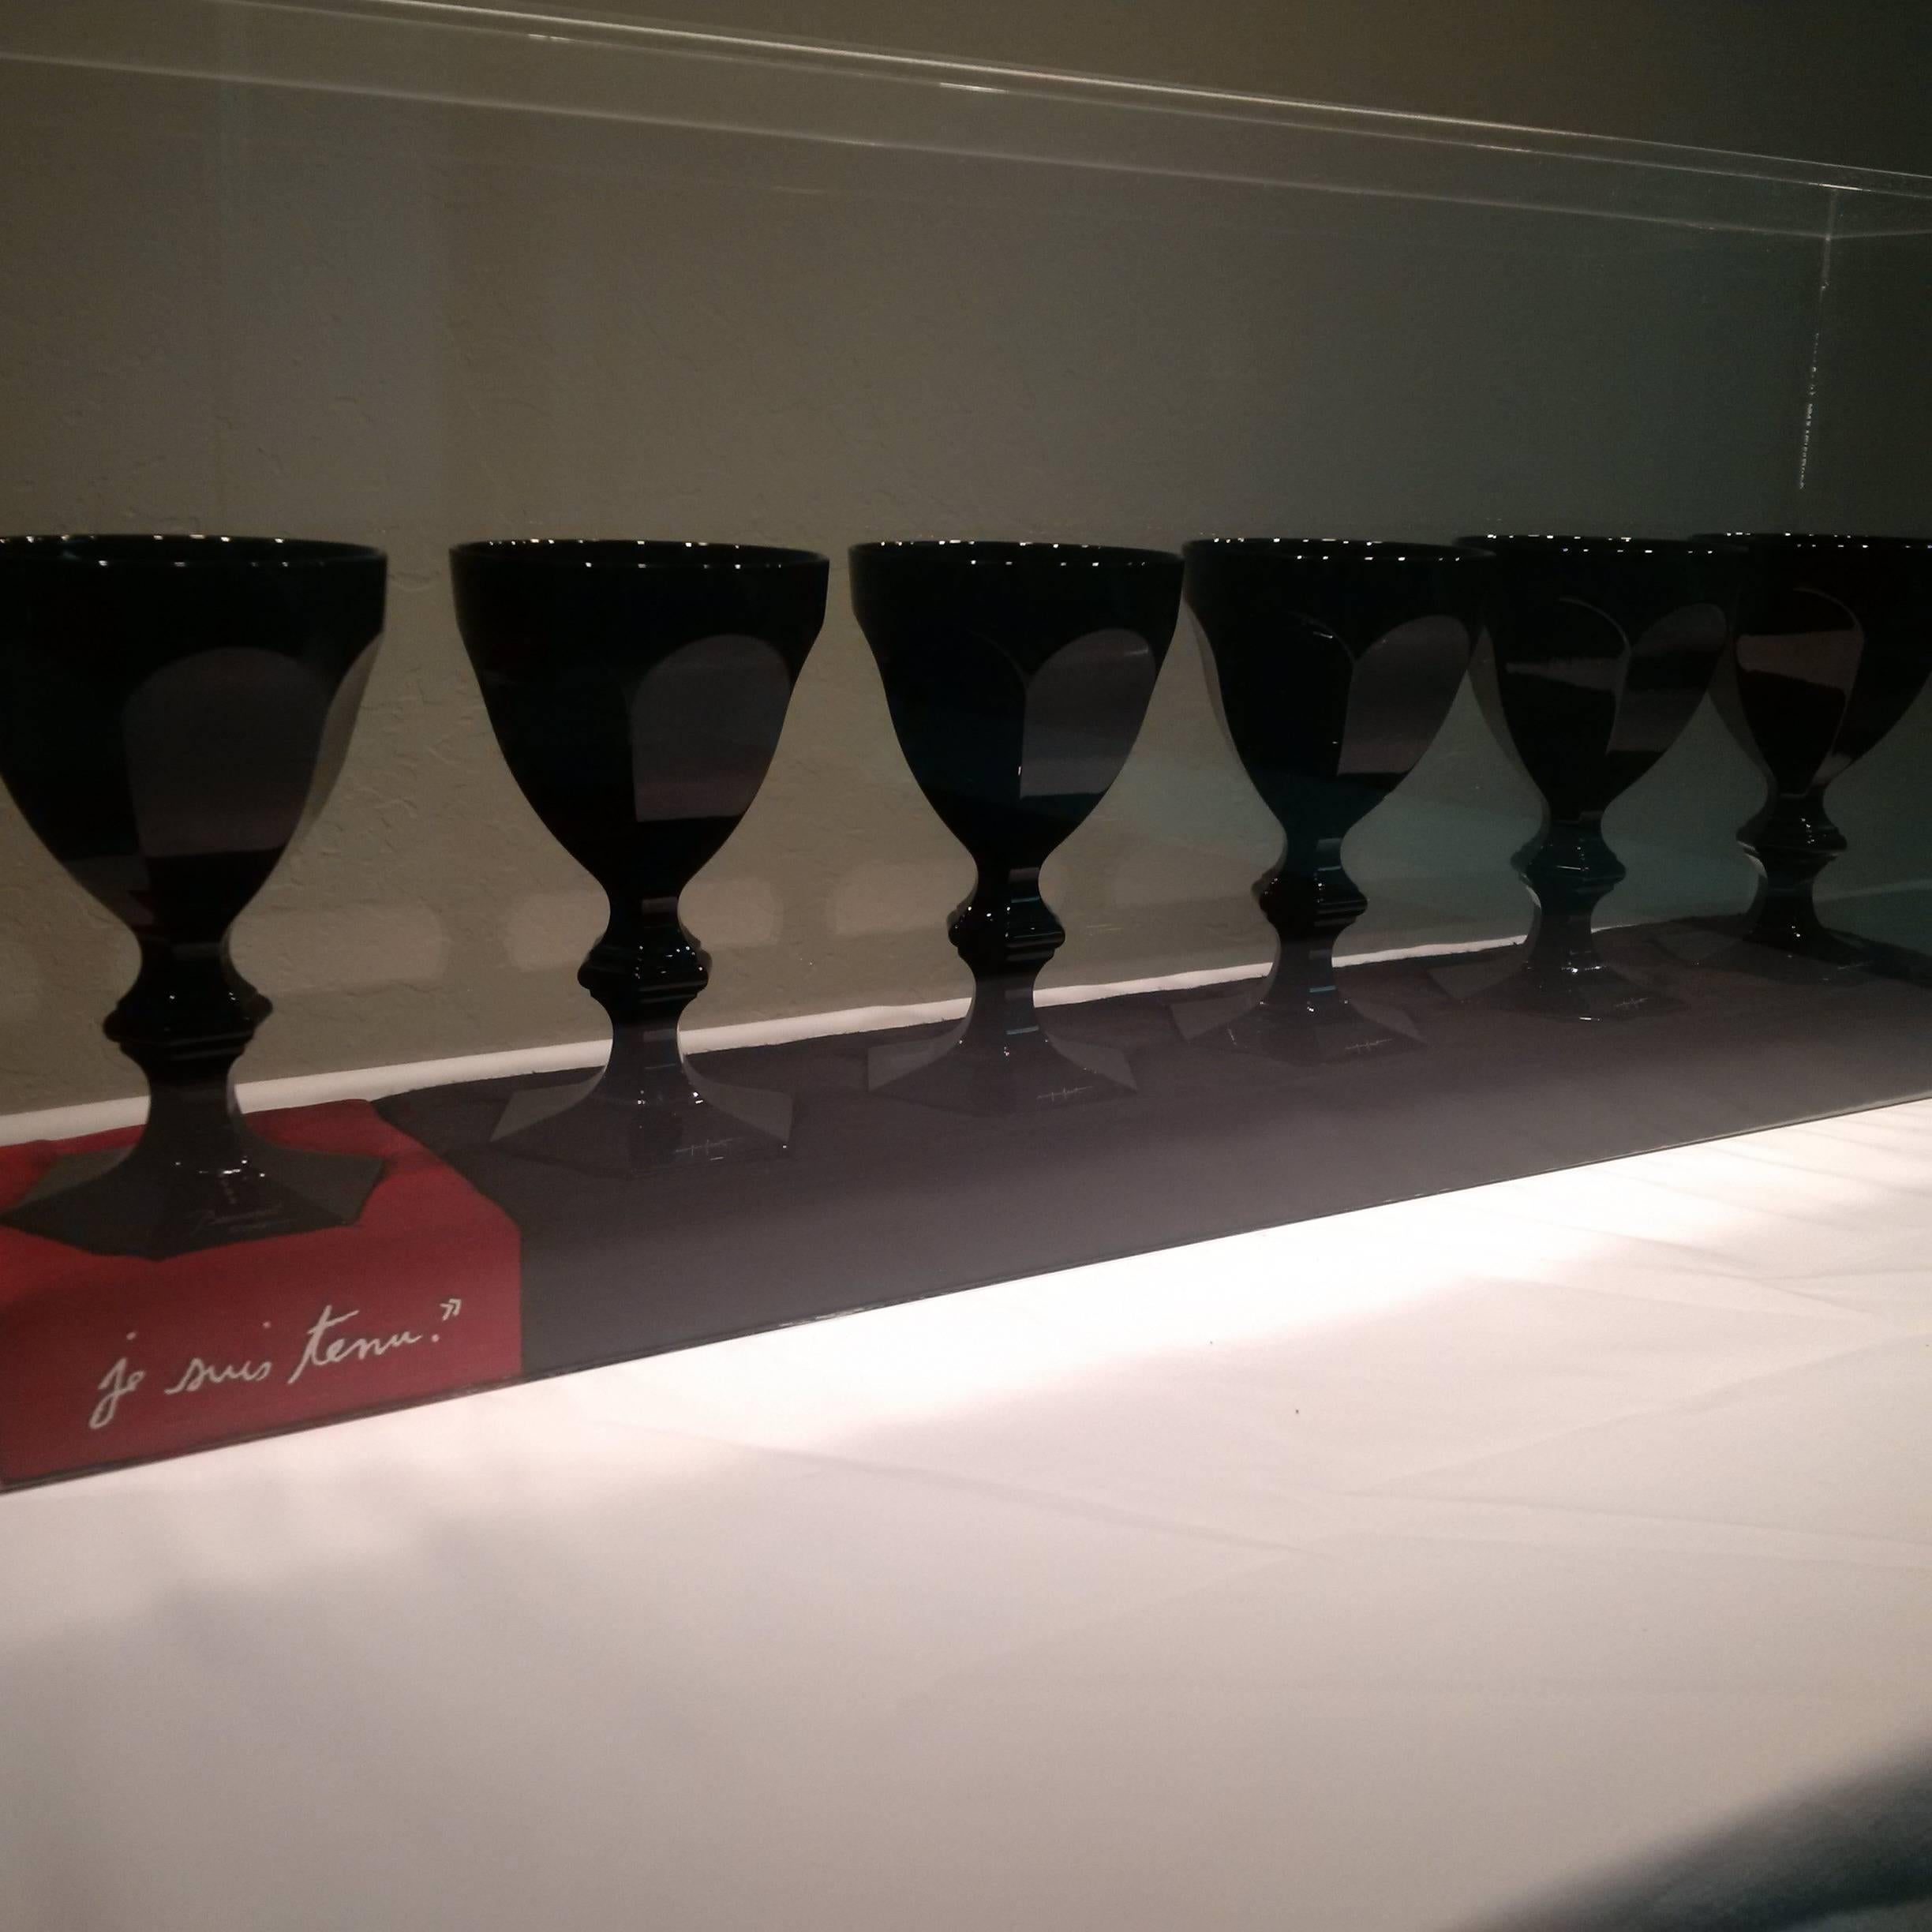 This showcase collection of signed and numbered wine glasses is Baccarat's presentation of Philippe Starck's interpretation of the Classic Harcourt wine glass in black crystal. All signed as well as the plexiglass case that covers all six fitted